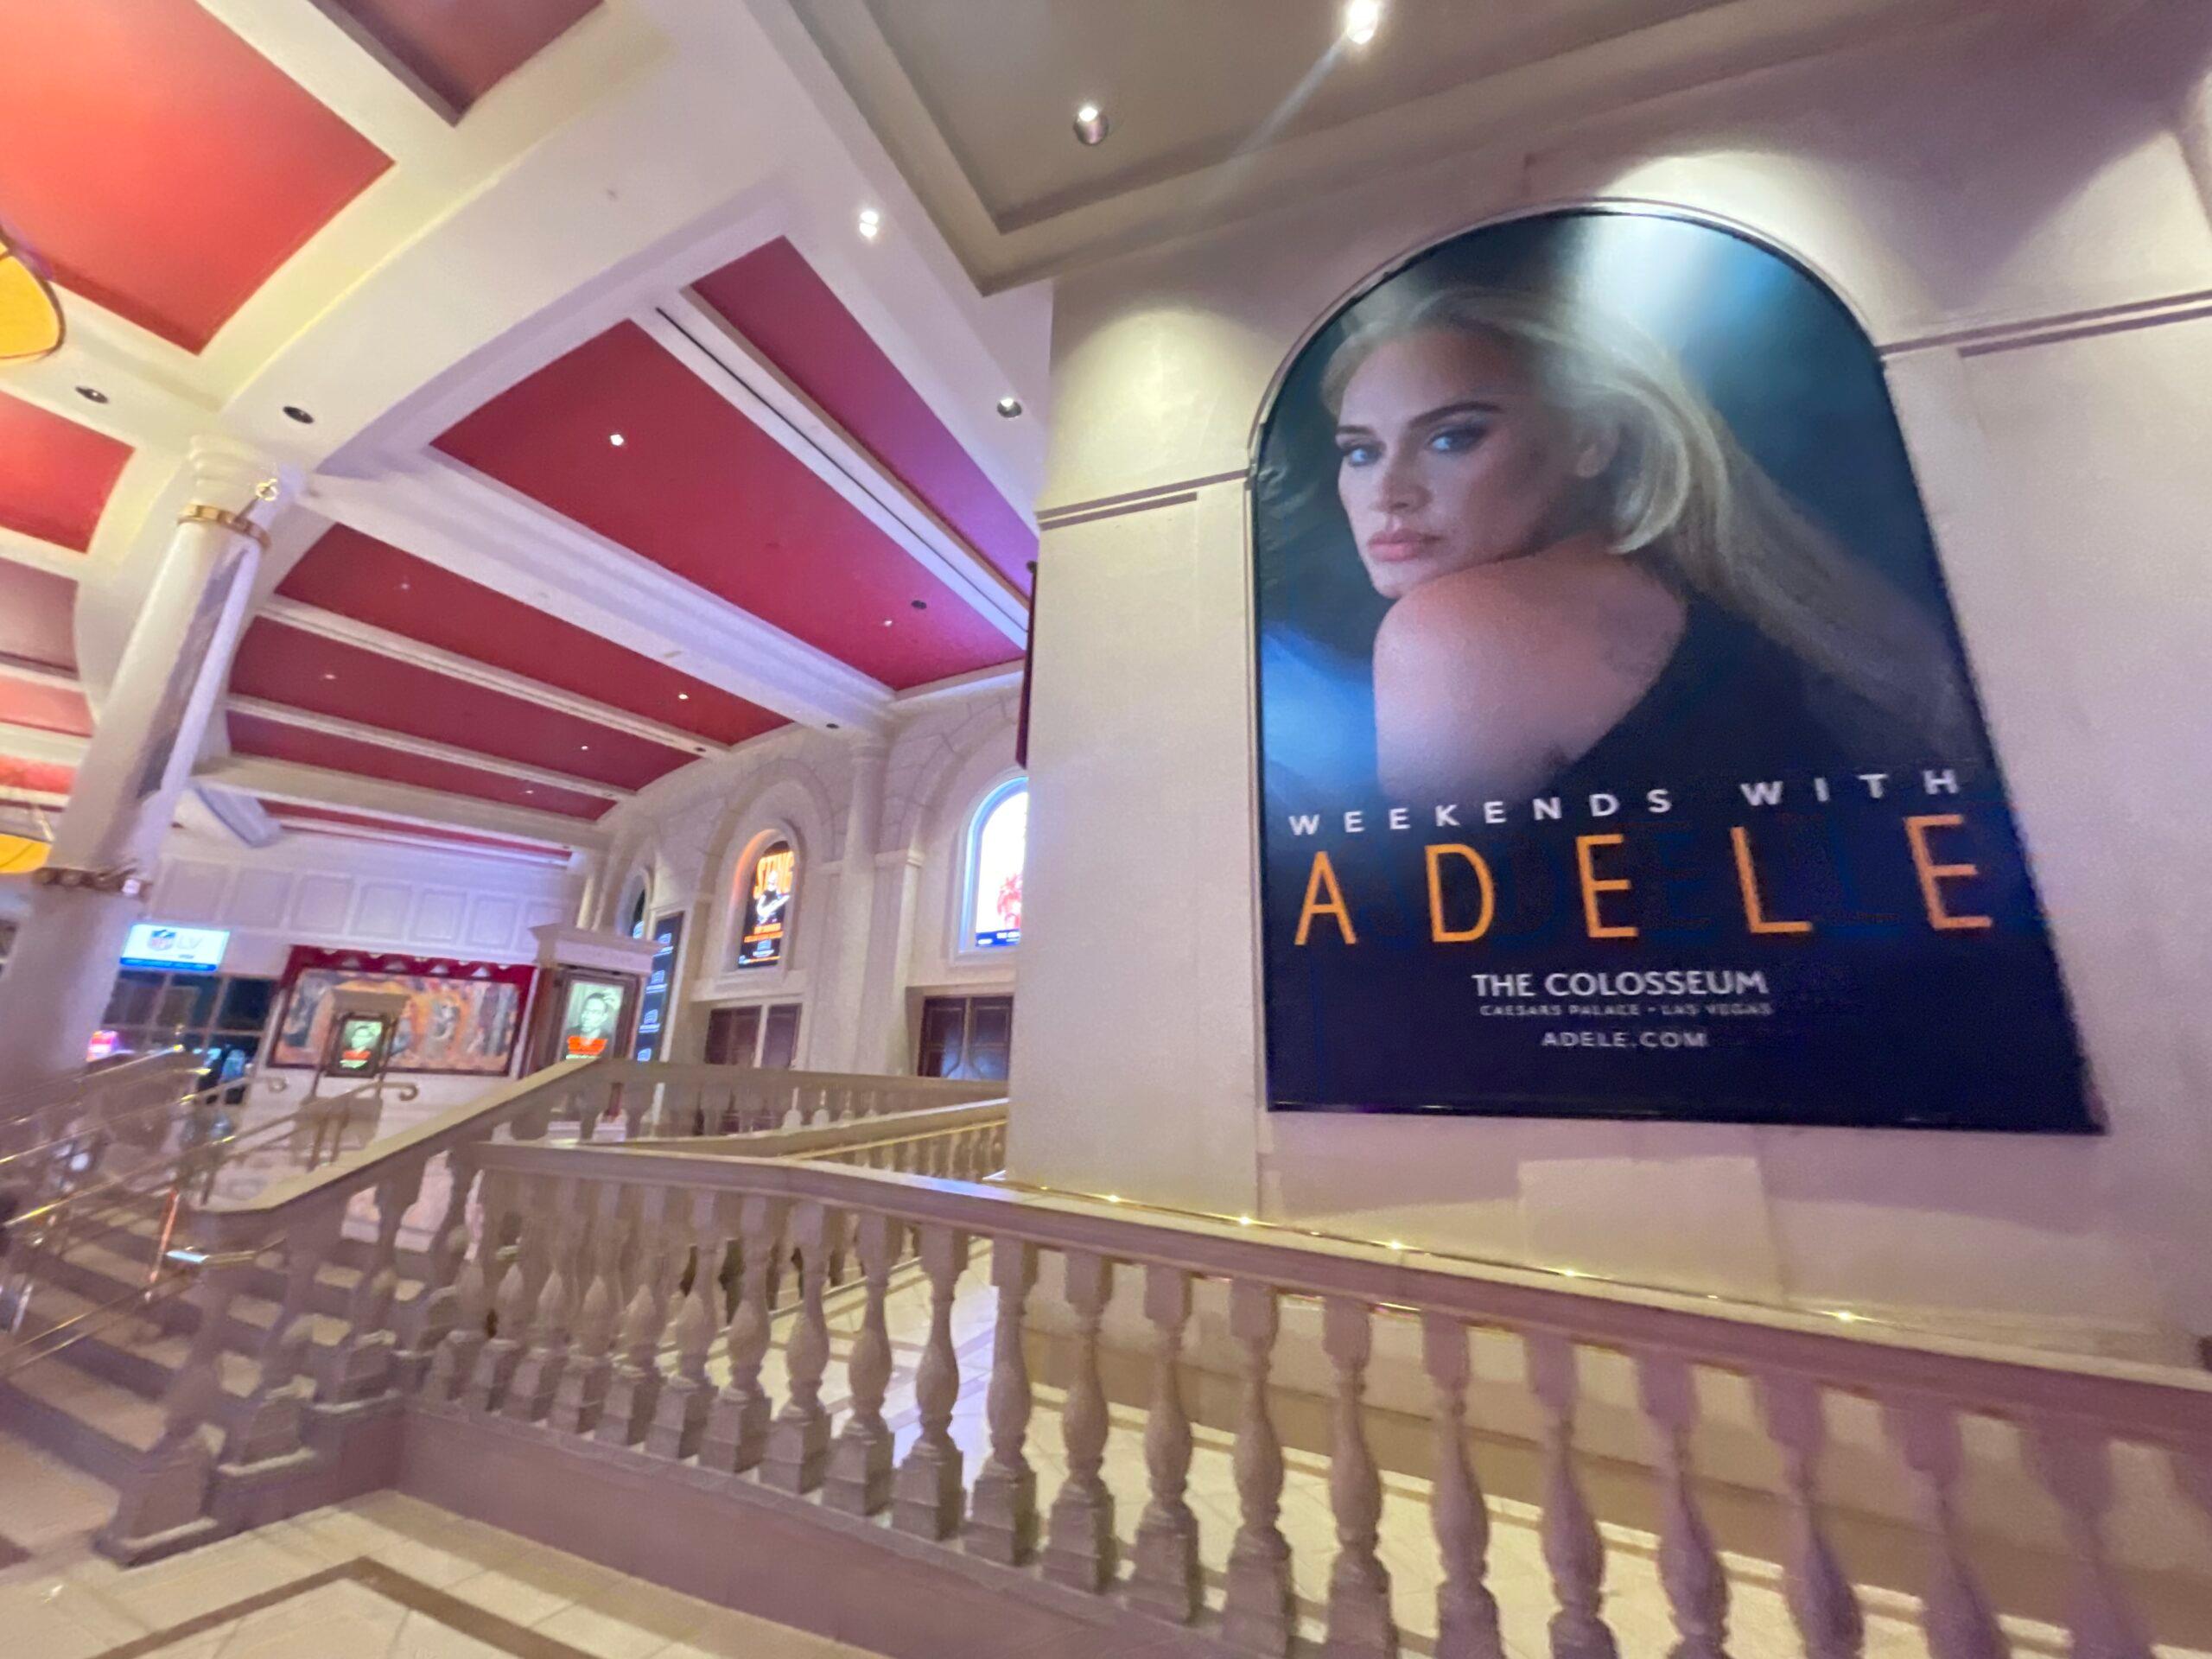 Last remaining posters and items inside Adele s store as her residency is moving to another casino in Las Vegas